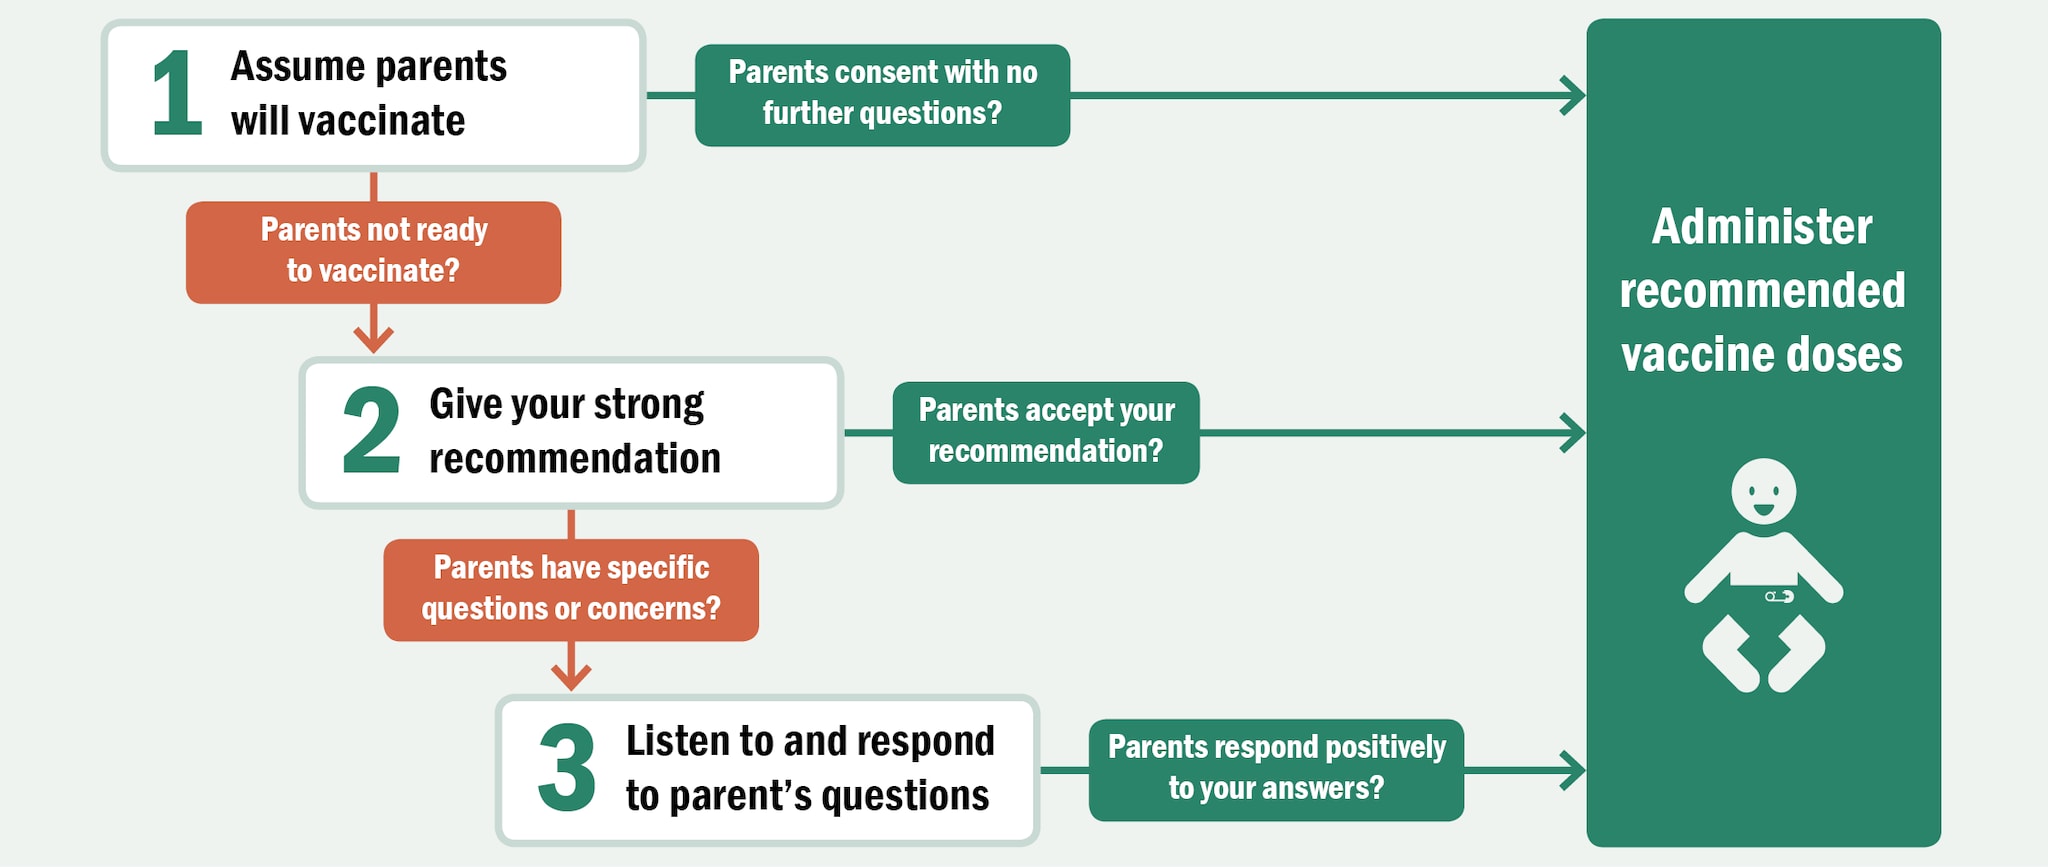 Flow chart describing steps to take when talking with parents about vaccines: Step one, Assume parents will vaccinate. If parents consent with no further questions, then administer recommended vaccine doses. If parents are not ready to vaccinate then, Step two, Give your strong recommendation. If parents accept your recommendation, then administer recommended vaccine doses. If parents have specific questions or concerns then, Step three, Listen to and respond to parent’s questions. If parents respond positively to your answers, then administer recommended vaccine doses.